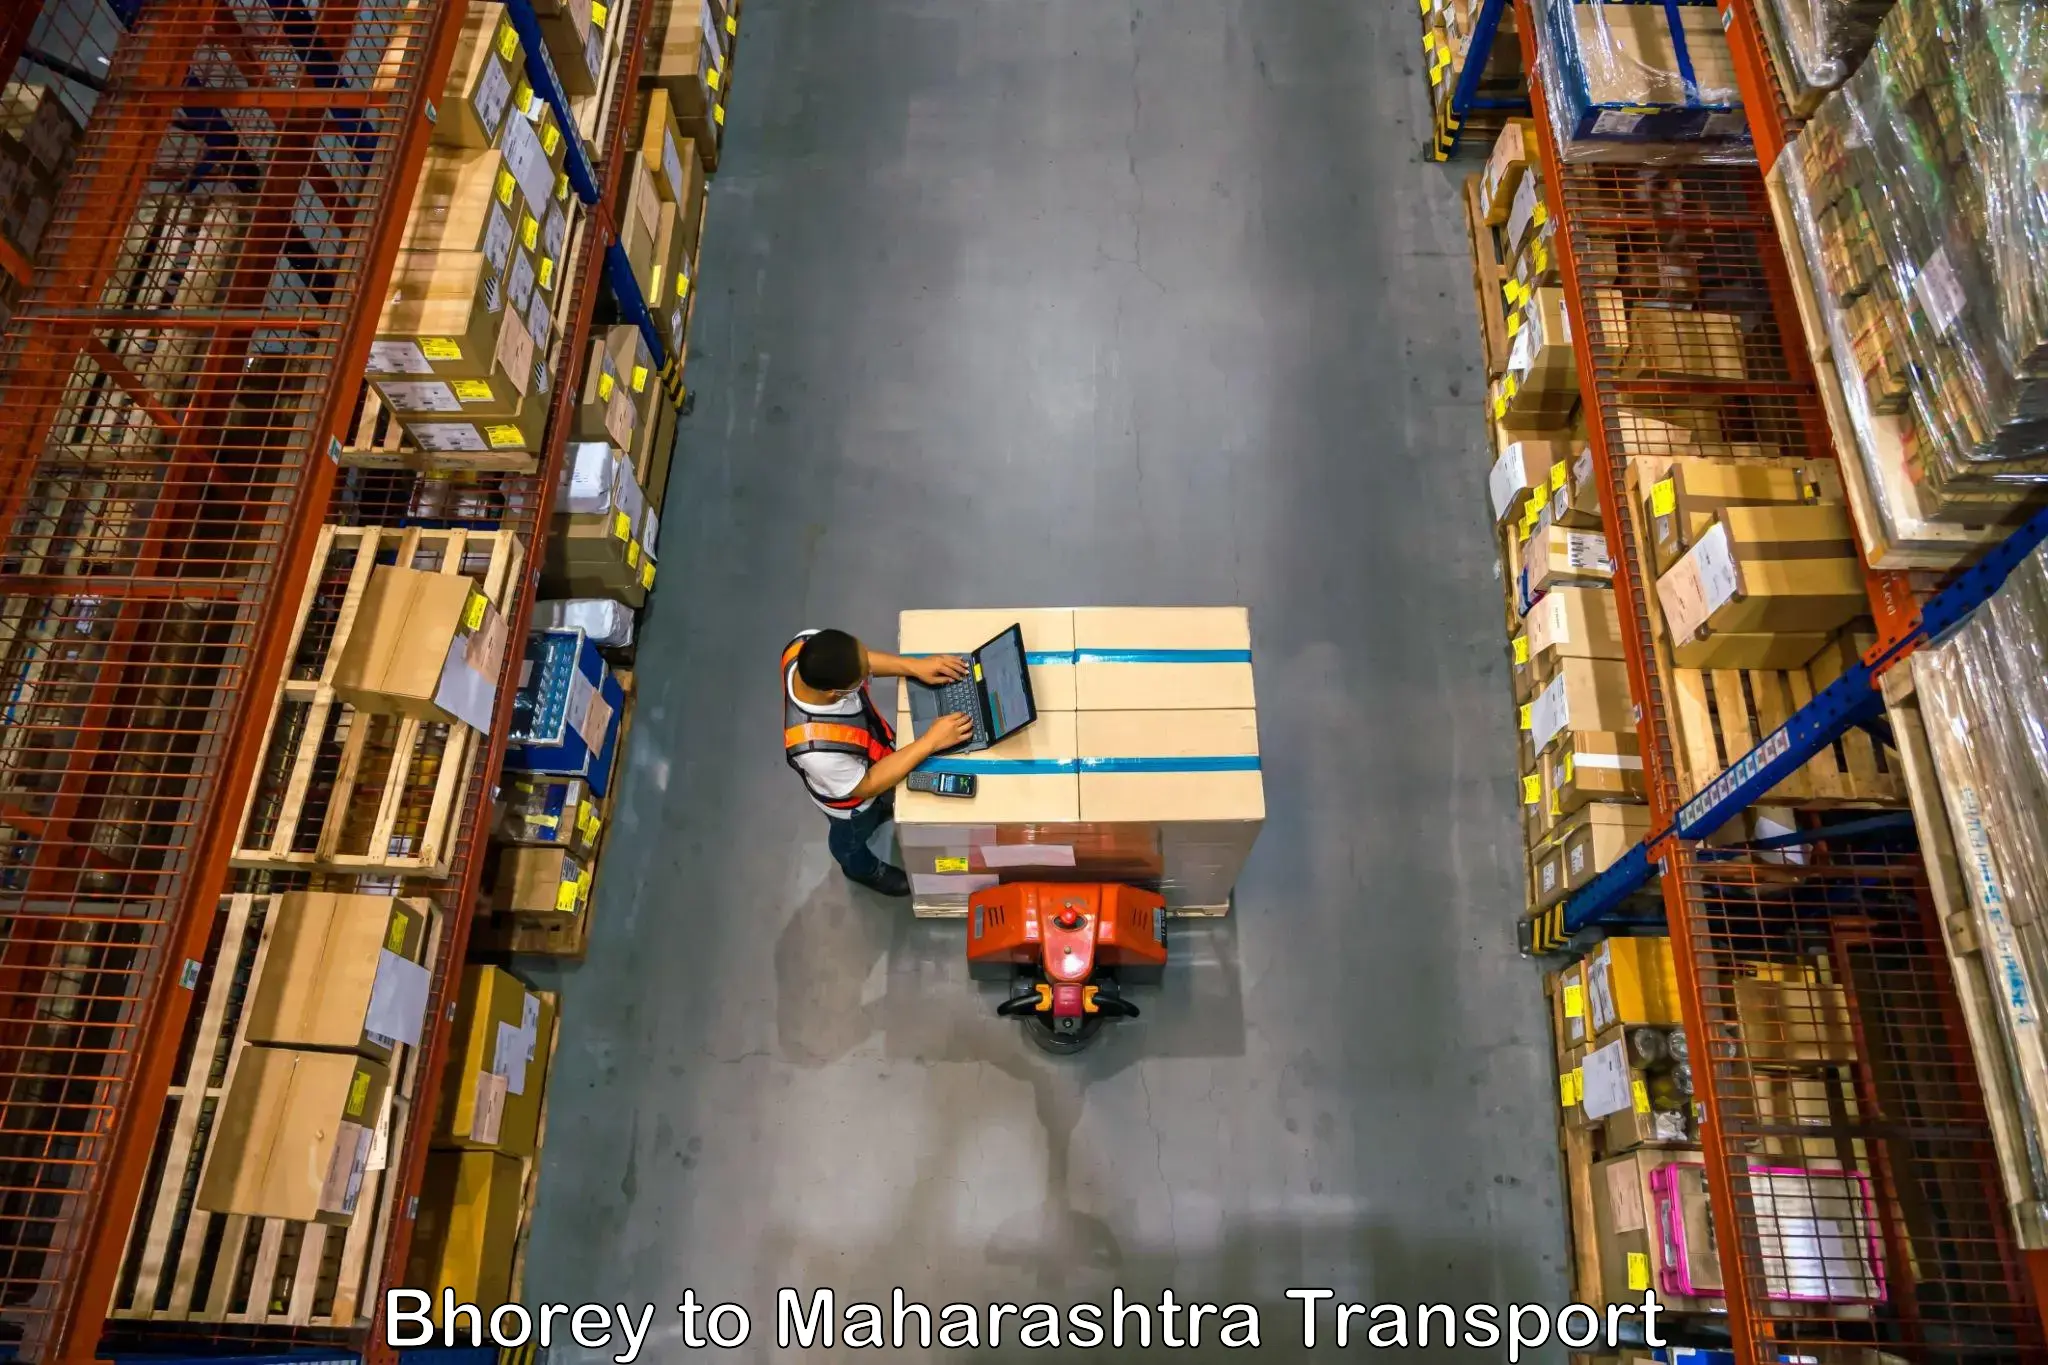 Truck transport companies in India Bhorey to Umarkhed